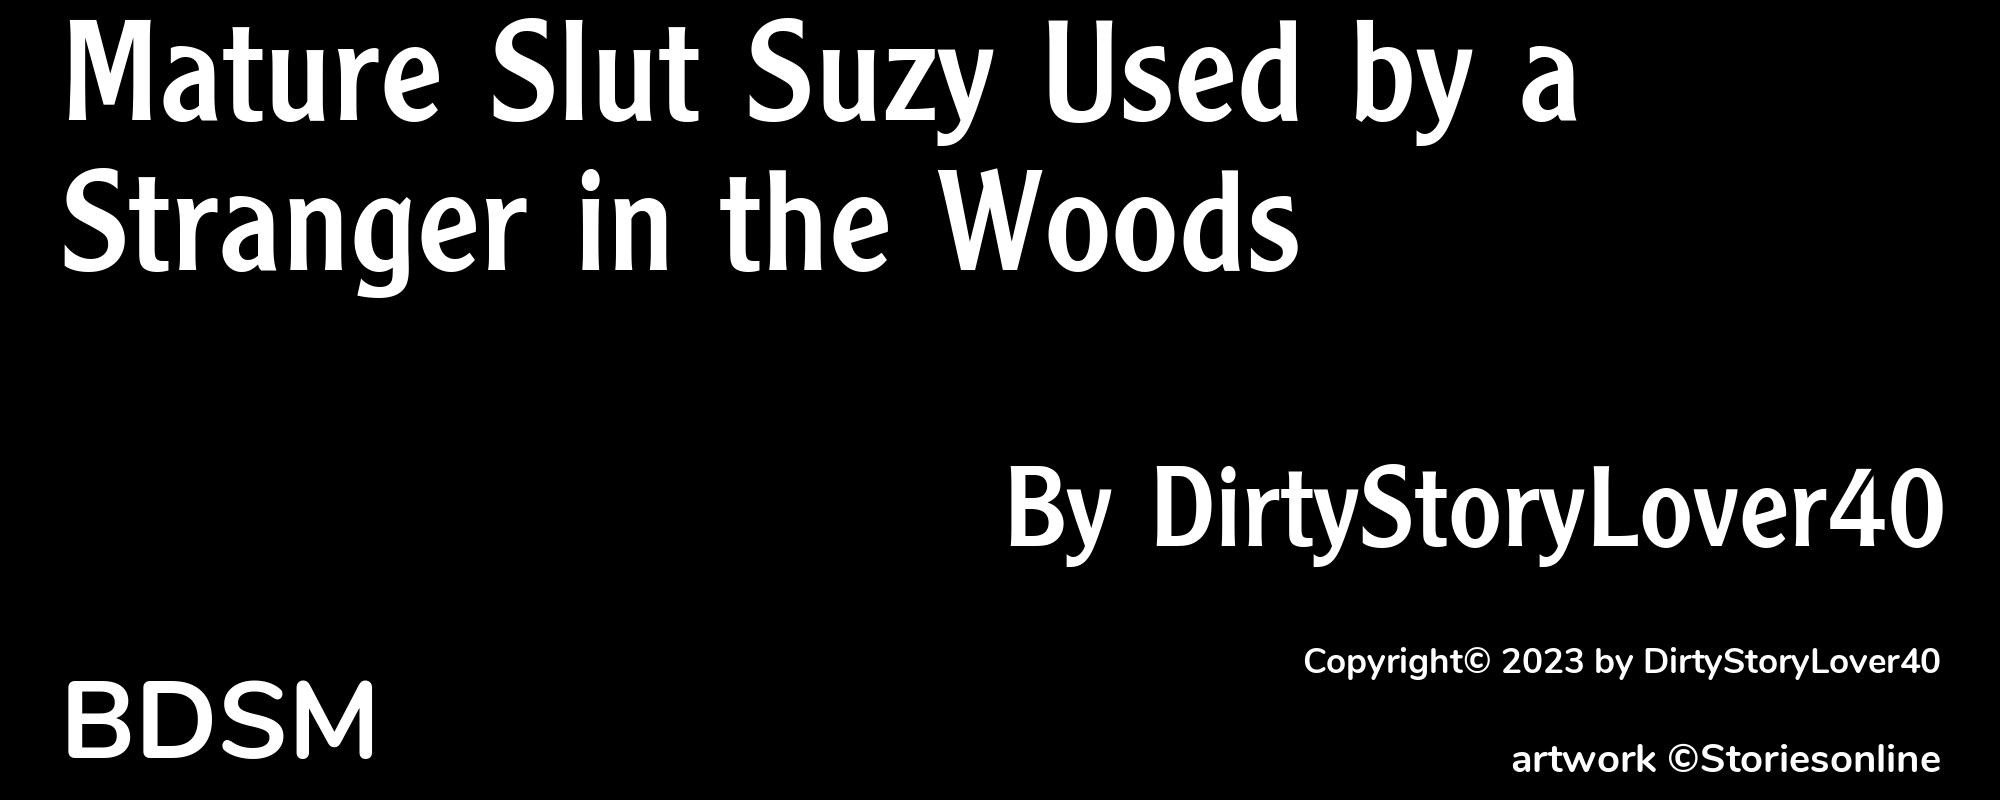 Mature Slut Suzy Used by a Stranger in the Woods - Cover